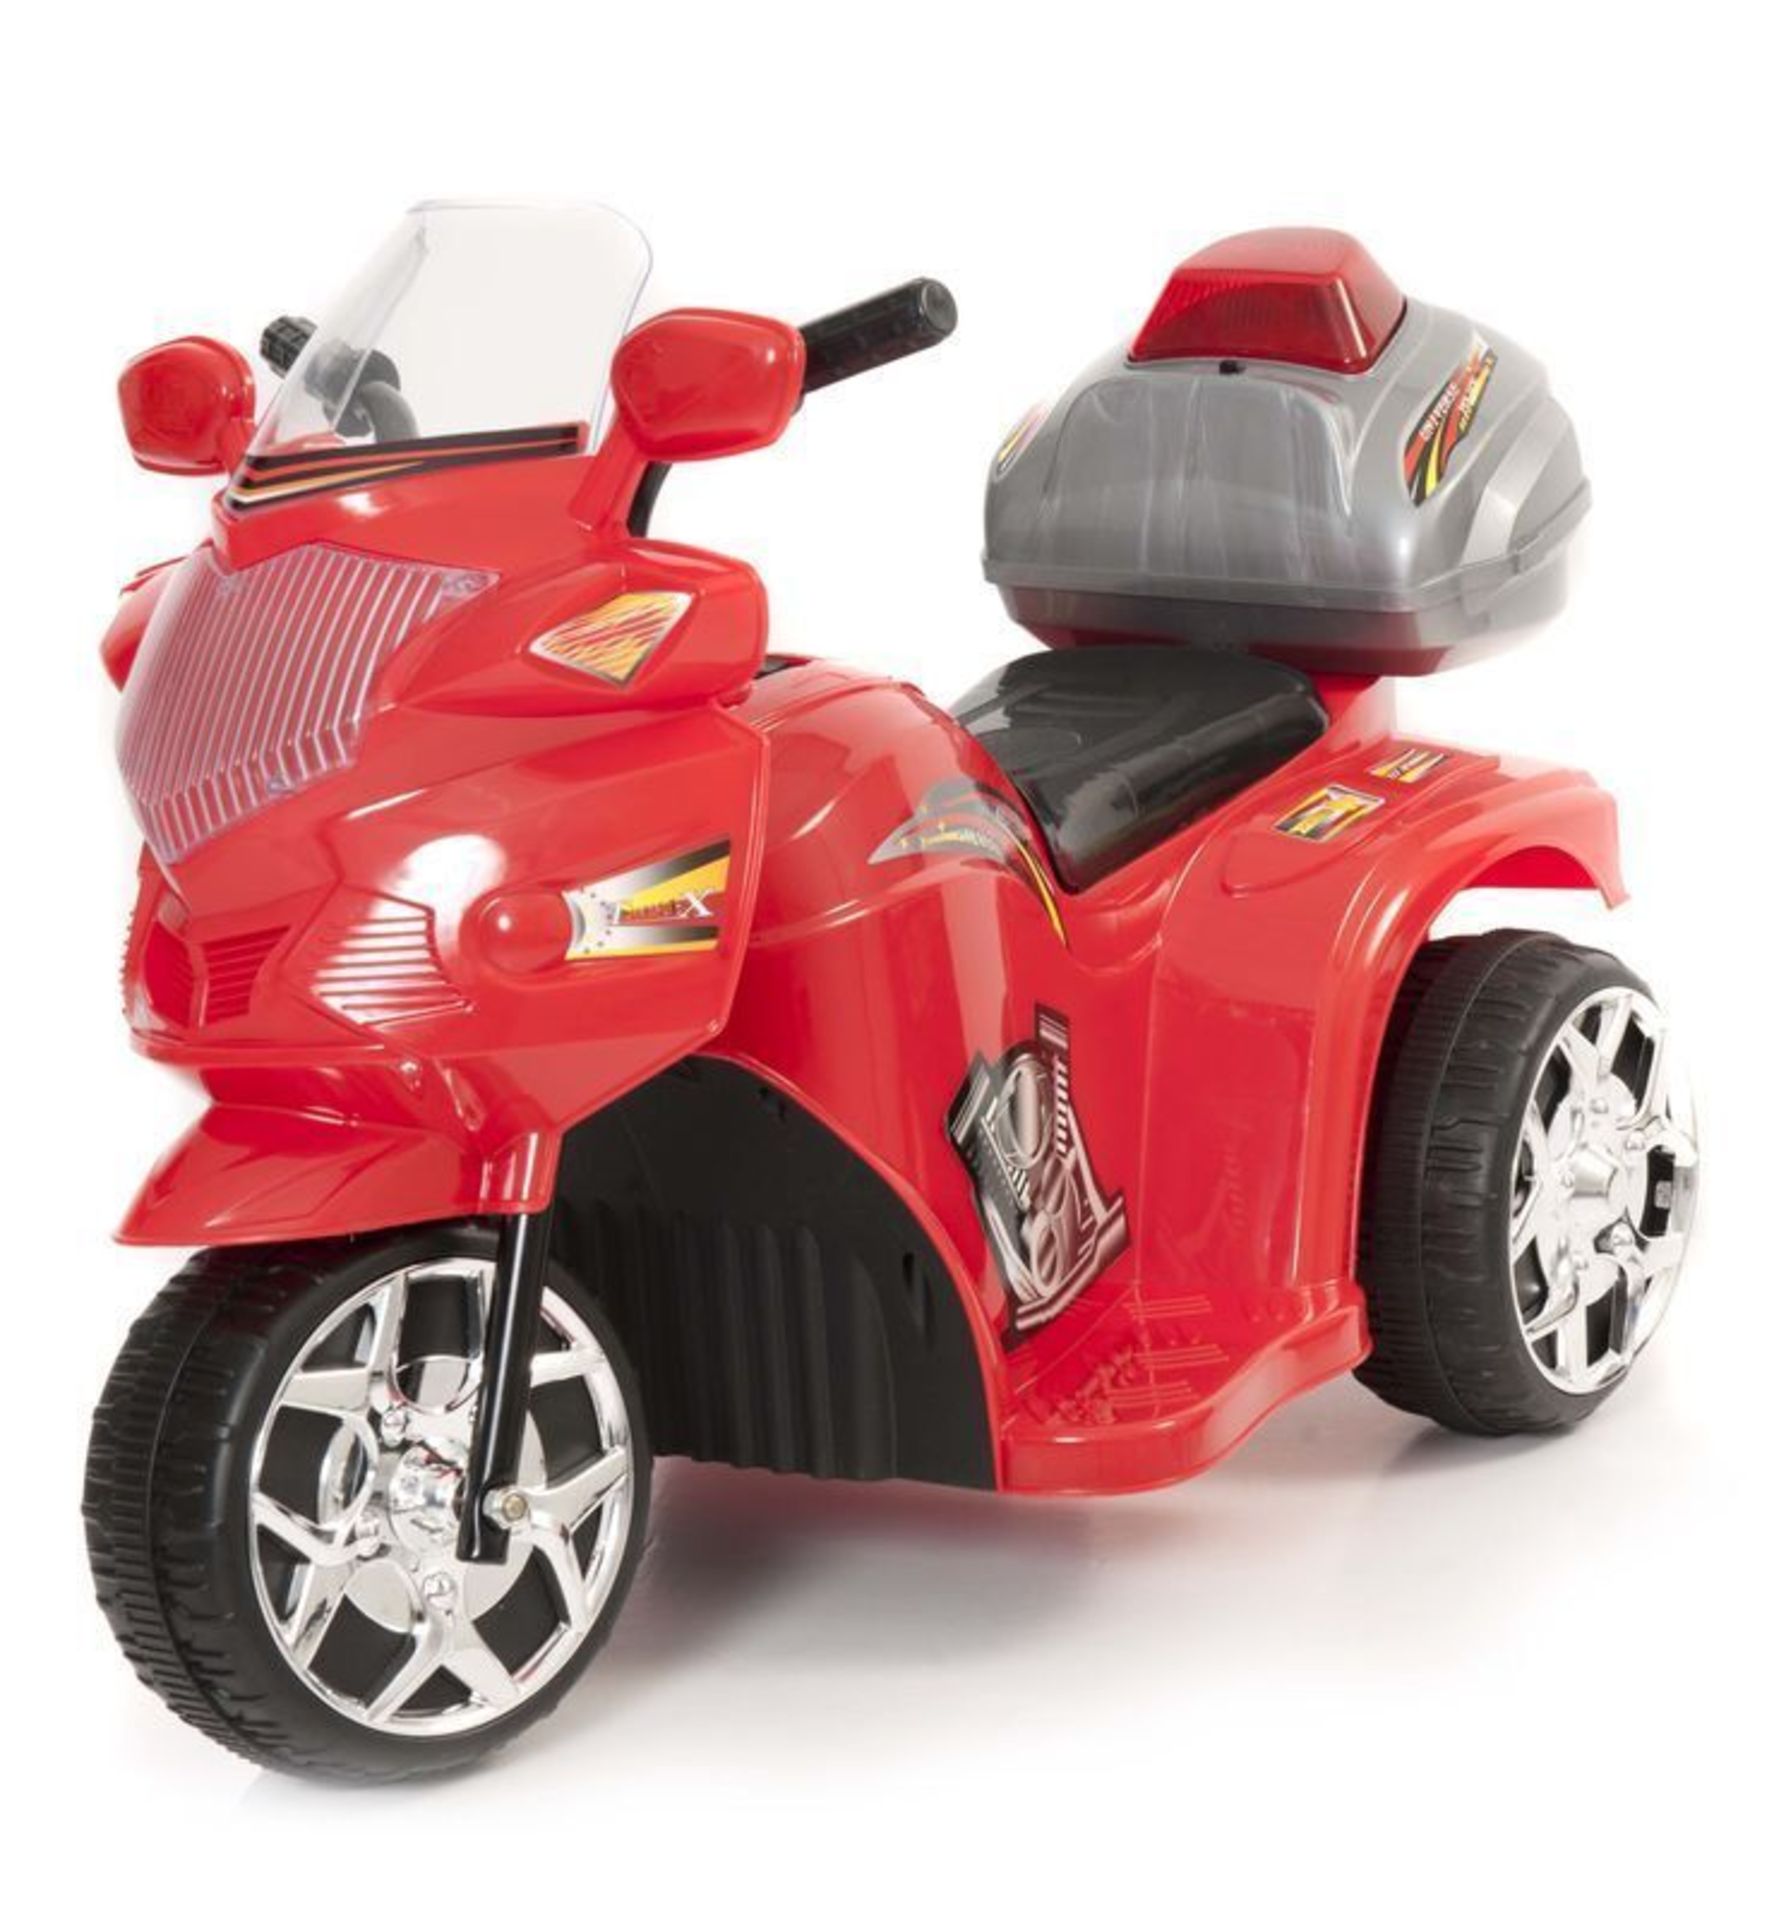 20 X 6V ELECTRIC RED POLICE-THEMED KIDS RIDEON TRIKES - BARGAIN! ** BRAND NEW **